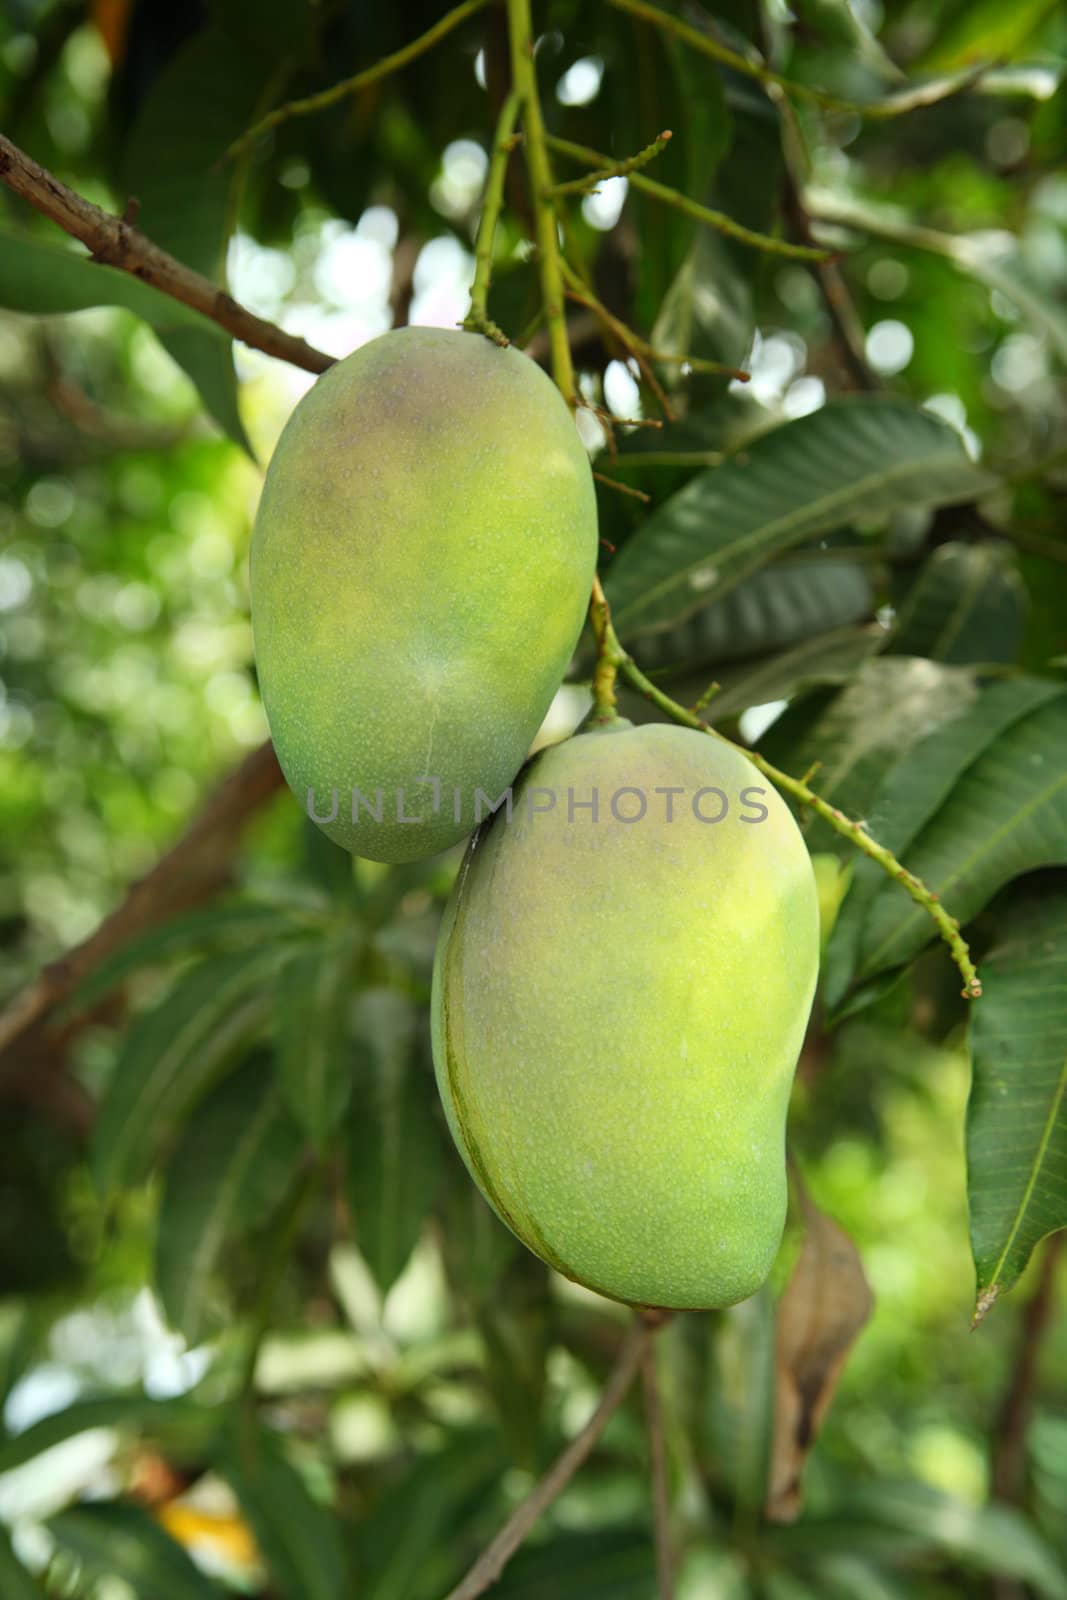 Mangoes on tree by photosoup